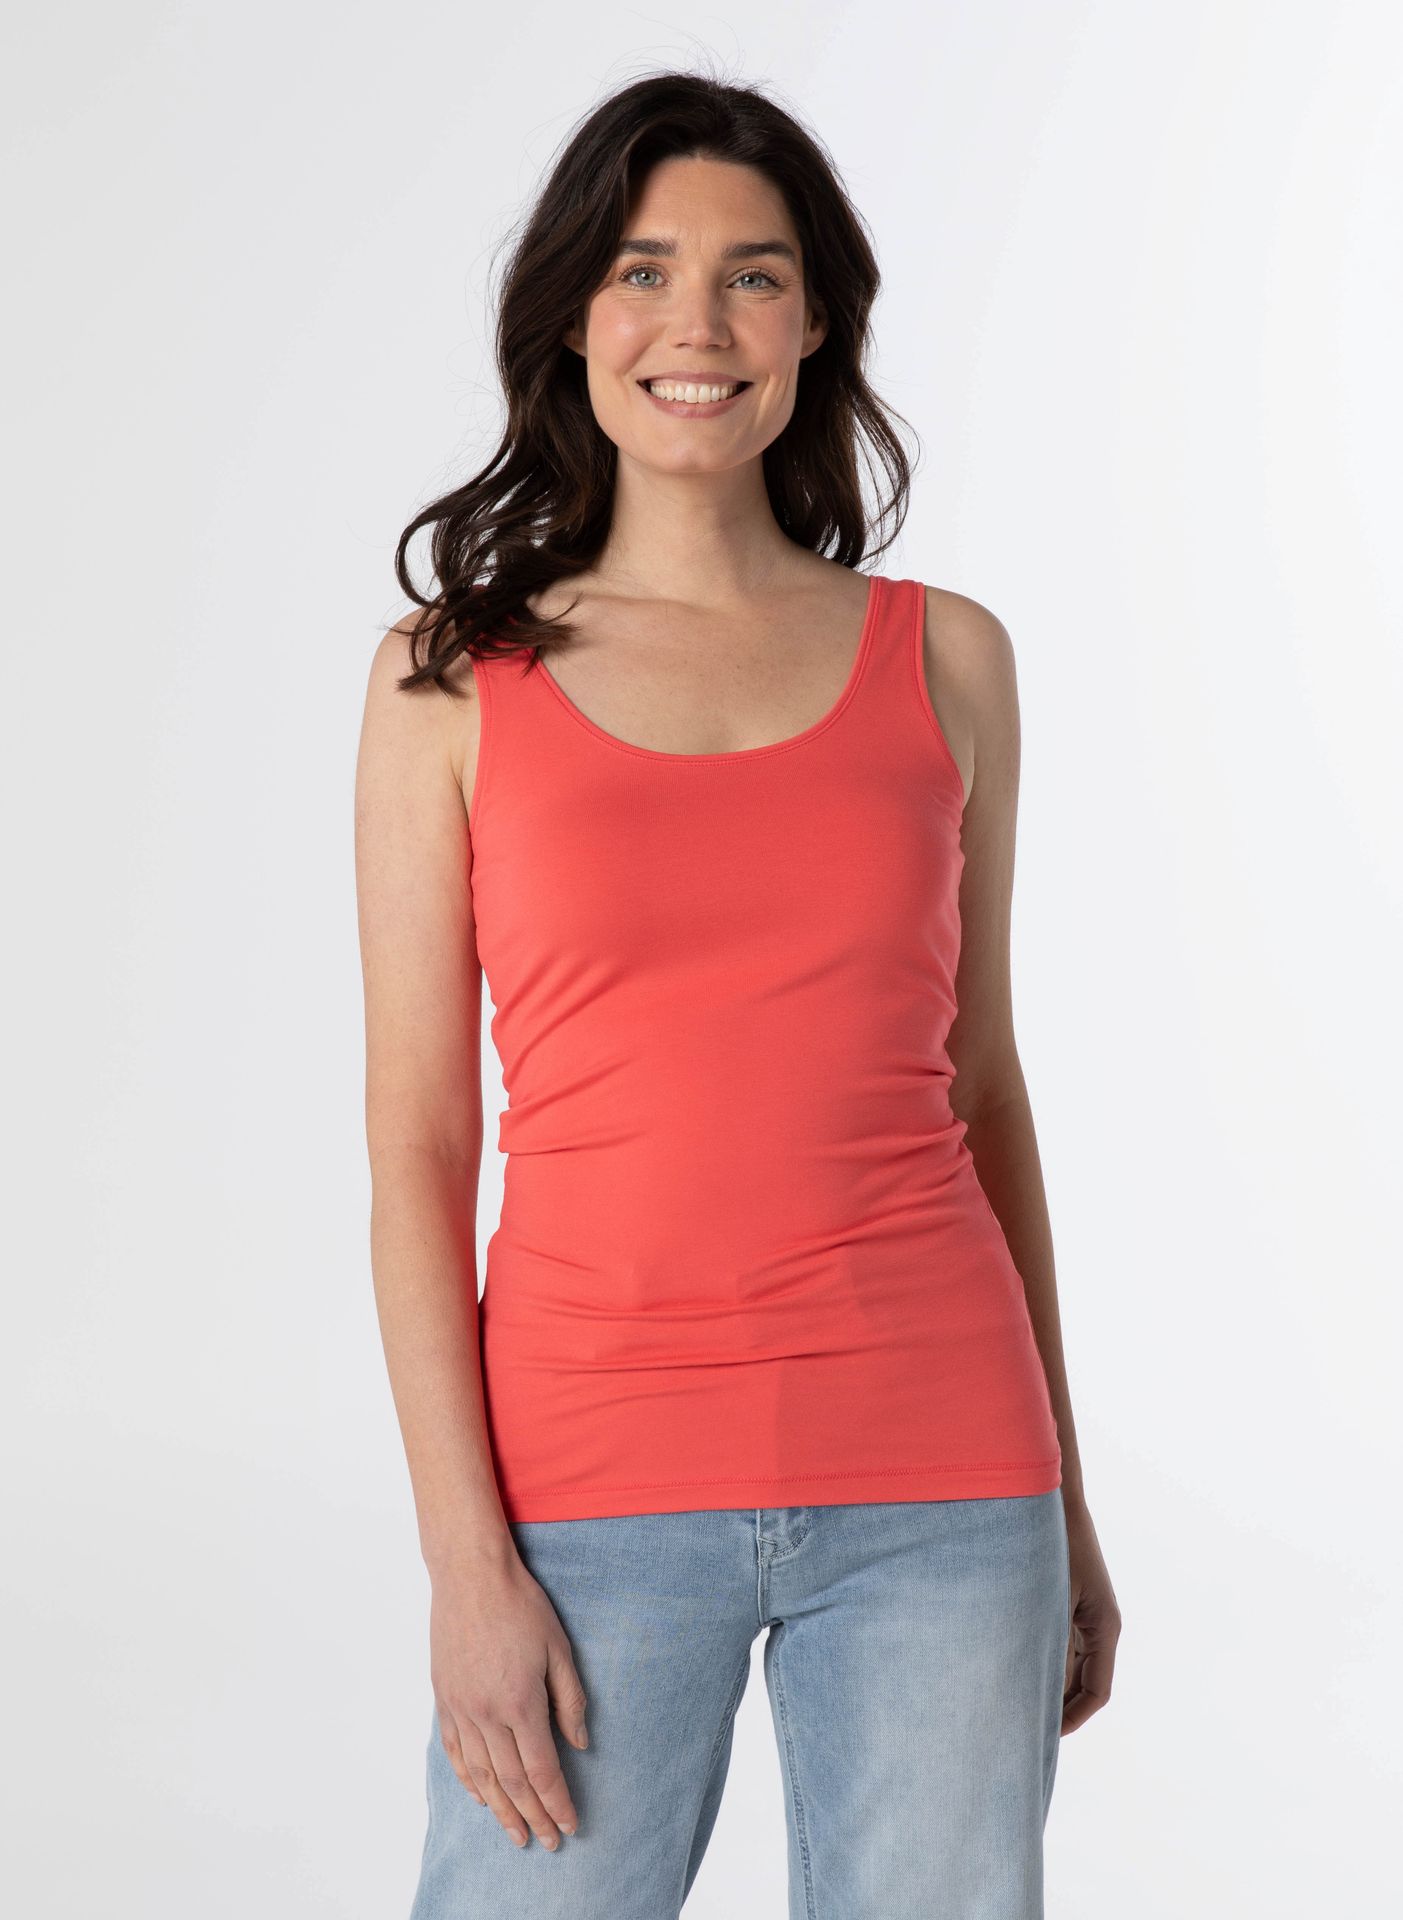 Norah Top Marianne roze coral 212247-706